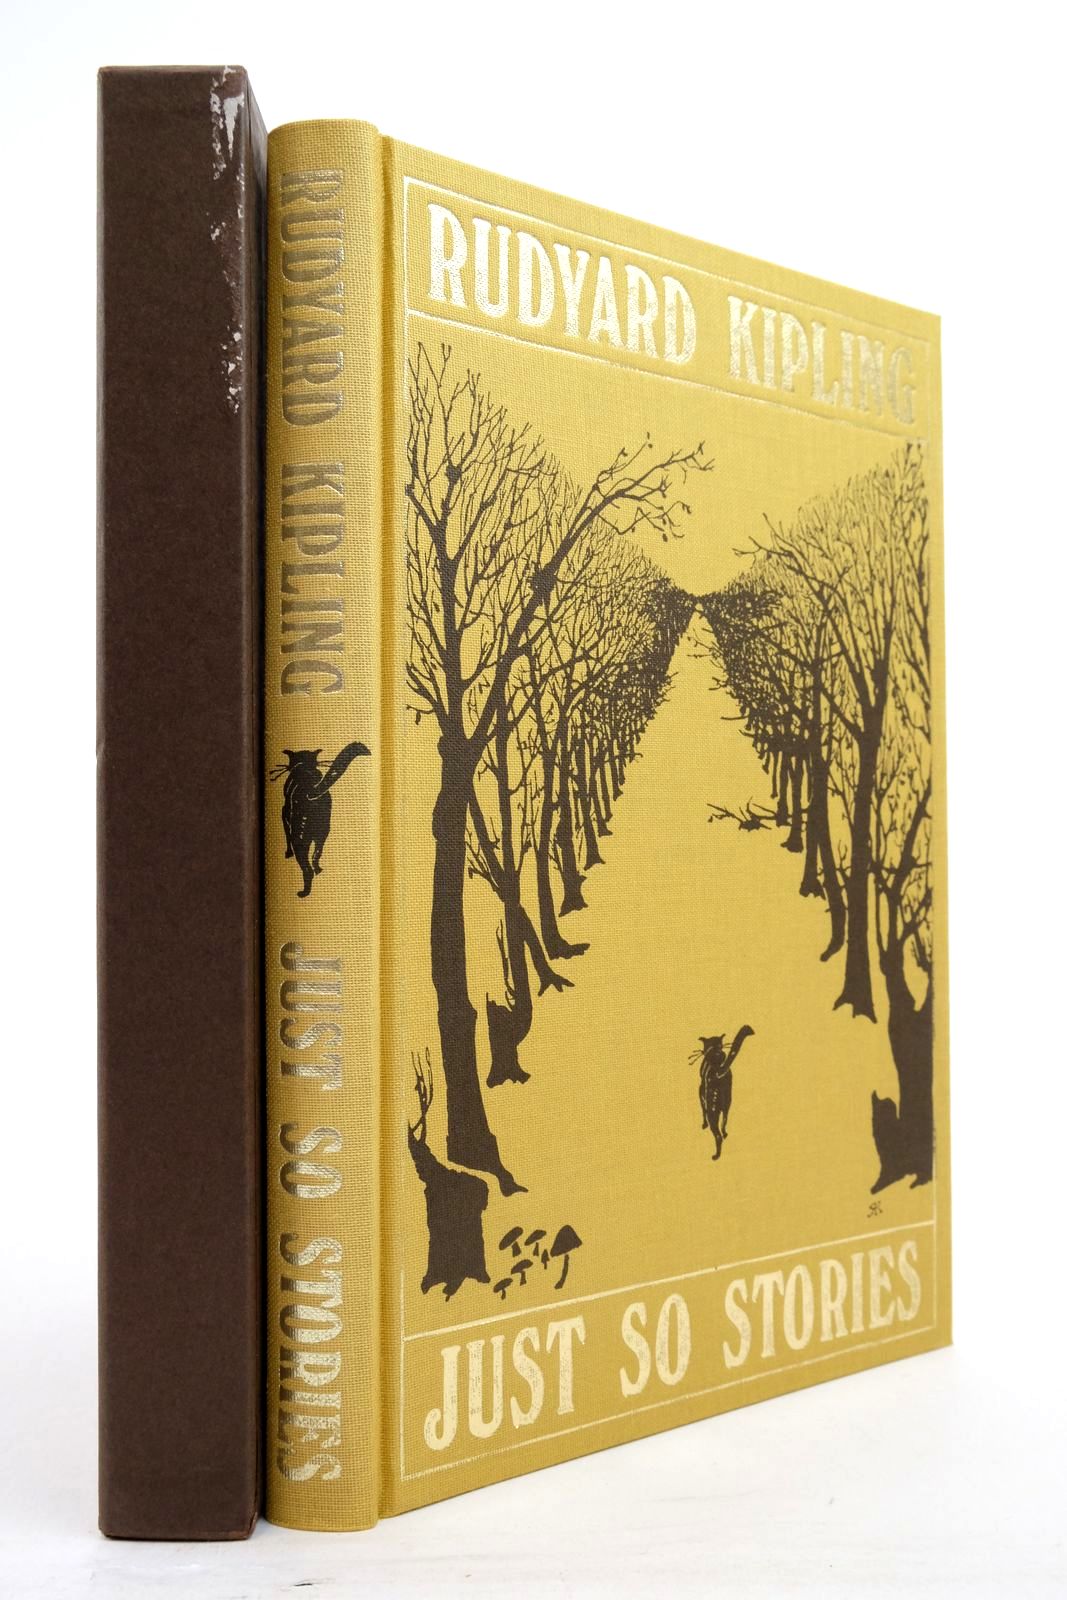 Photo of JUST SO STORIES written by Kipling, Rudyard illustrated by Kipling, Rudyard published by Folio Society (STOCK CODE: 2138125)  for sale by Stella & Rose's Books